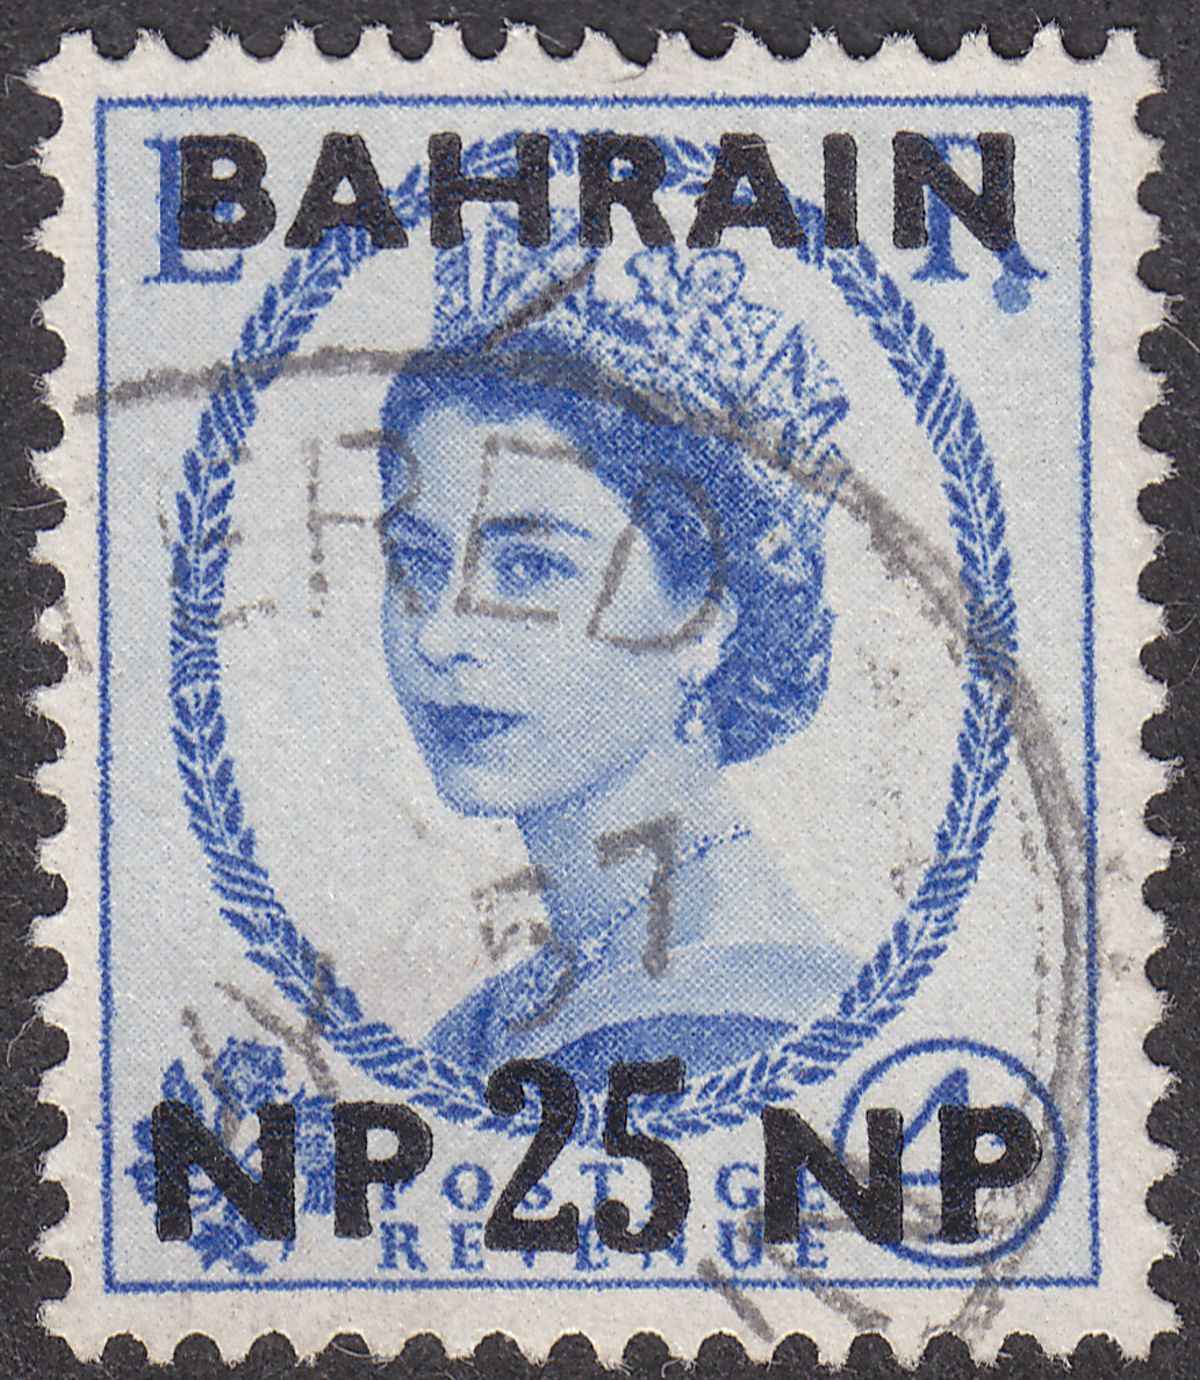 Bahrain 1957 QEII 25np Surcharge on 4d Dot Below R of ER Variety Used